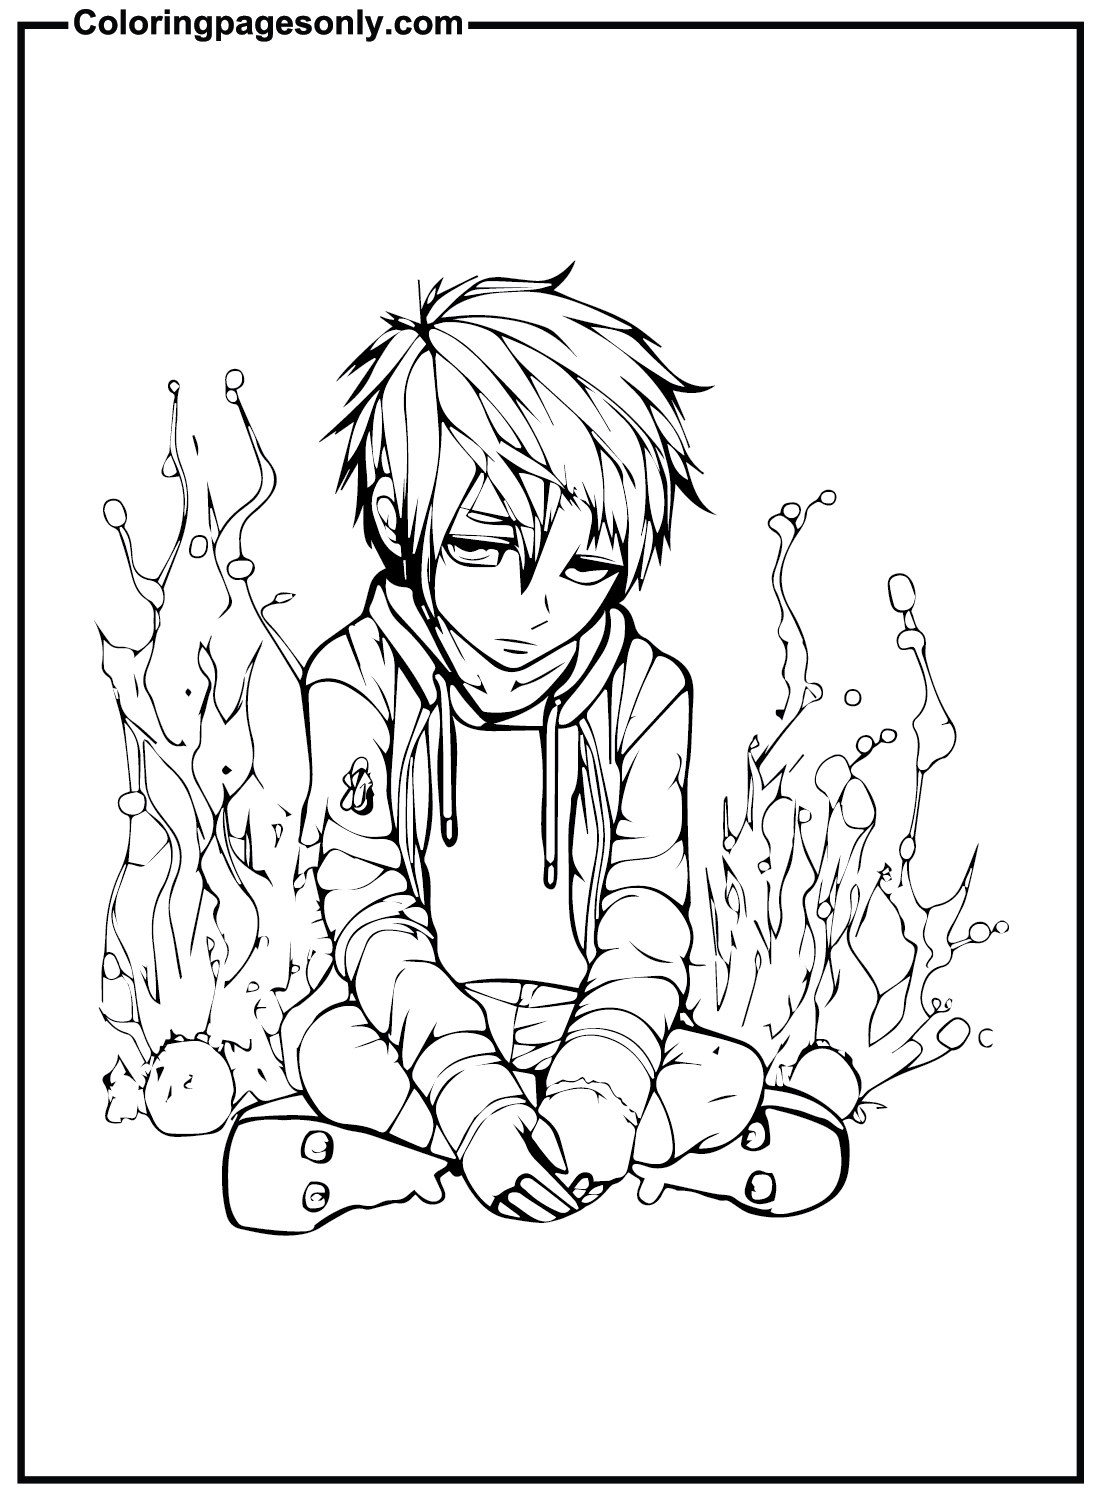 Emo Clothes Coloring Pages